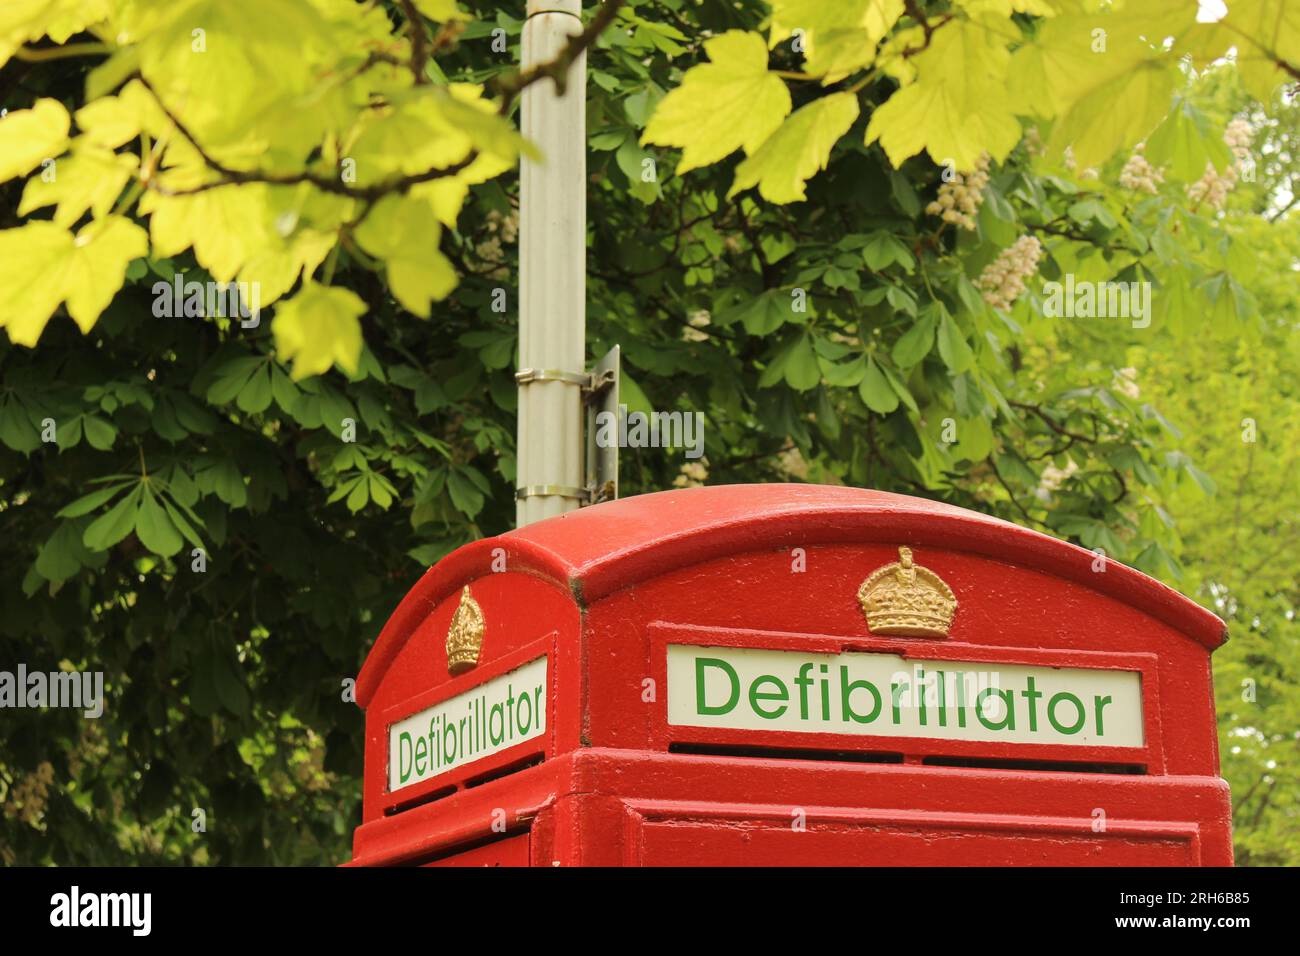 Top of Old Red telephone box converted to hold defibrillator. Typical British telephone booth reimagined as defibrillator station - Cheltenham, UK Stock Photo